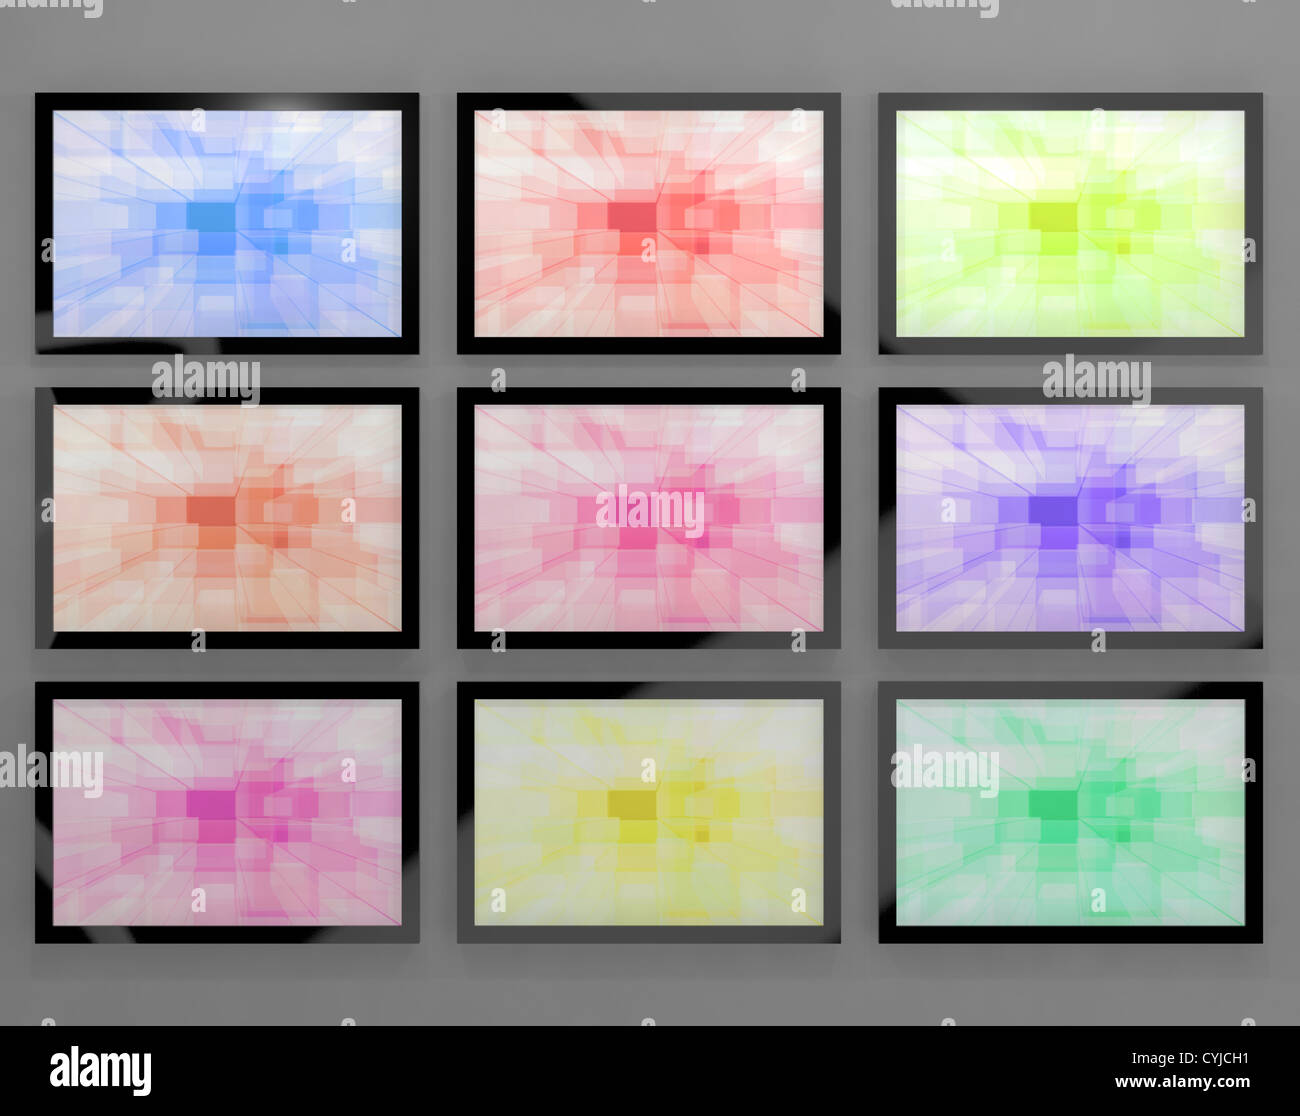 TV Monitors Wall Mounted In Different Colors Representing High Definition Televisions Or HDTV Stock Photo